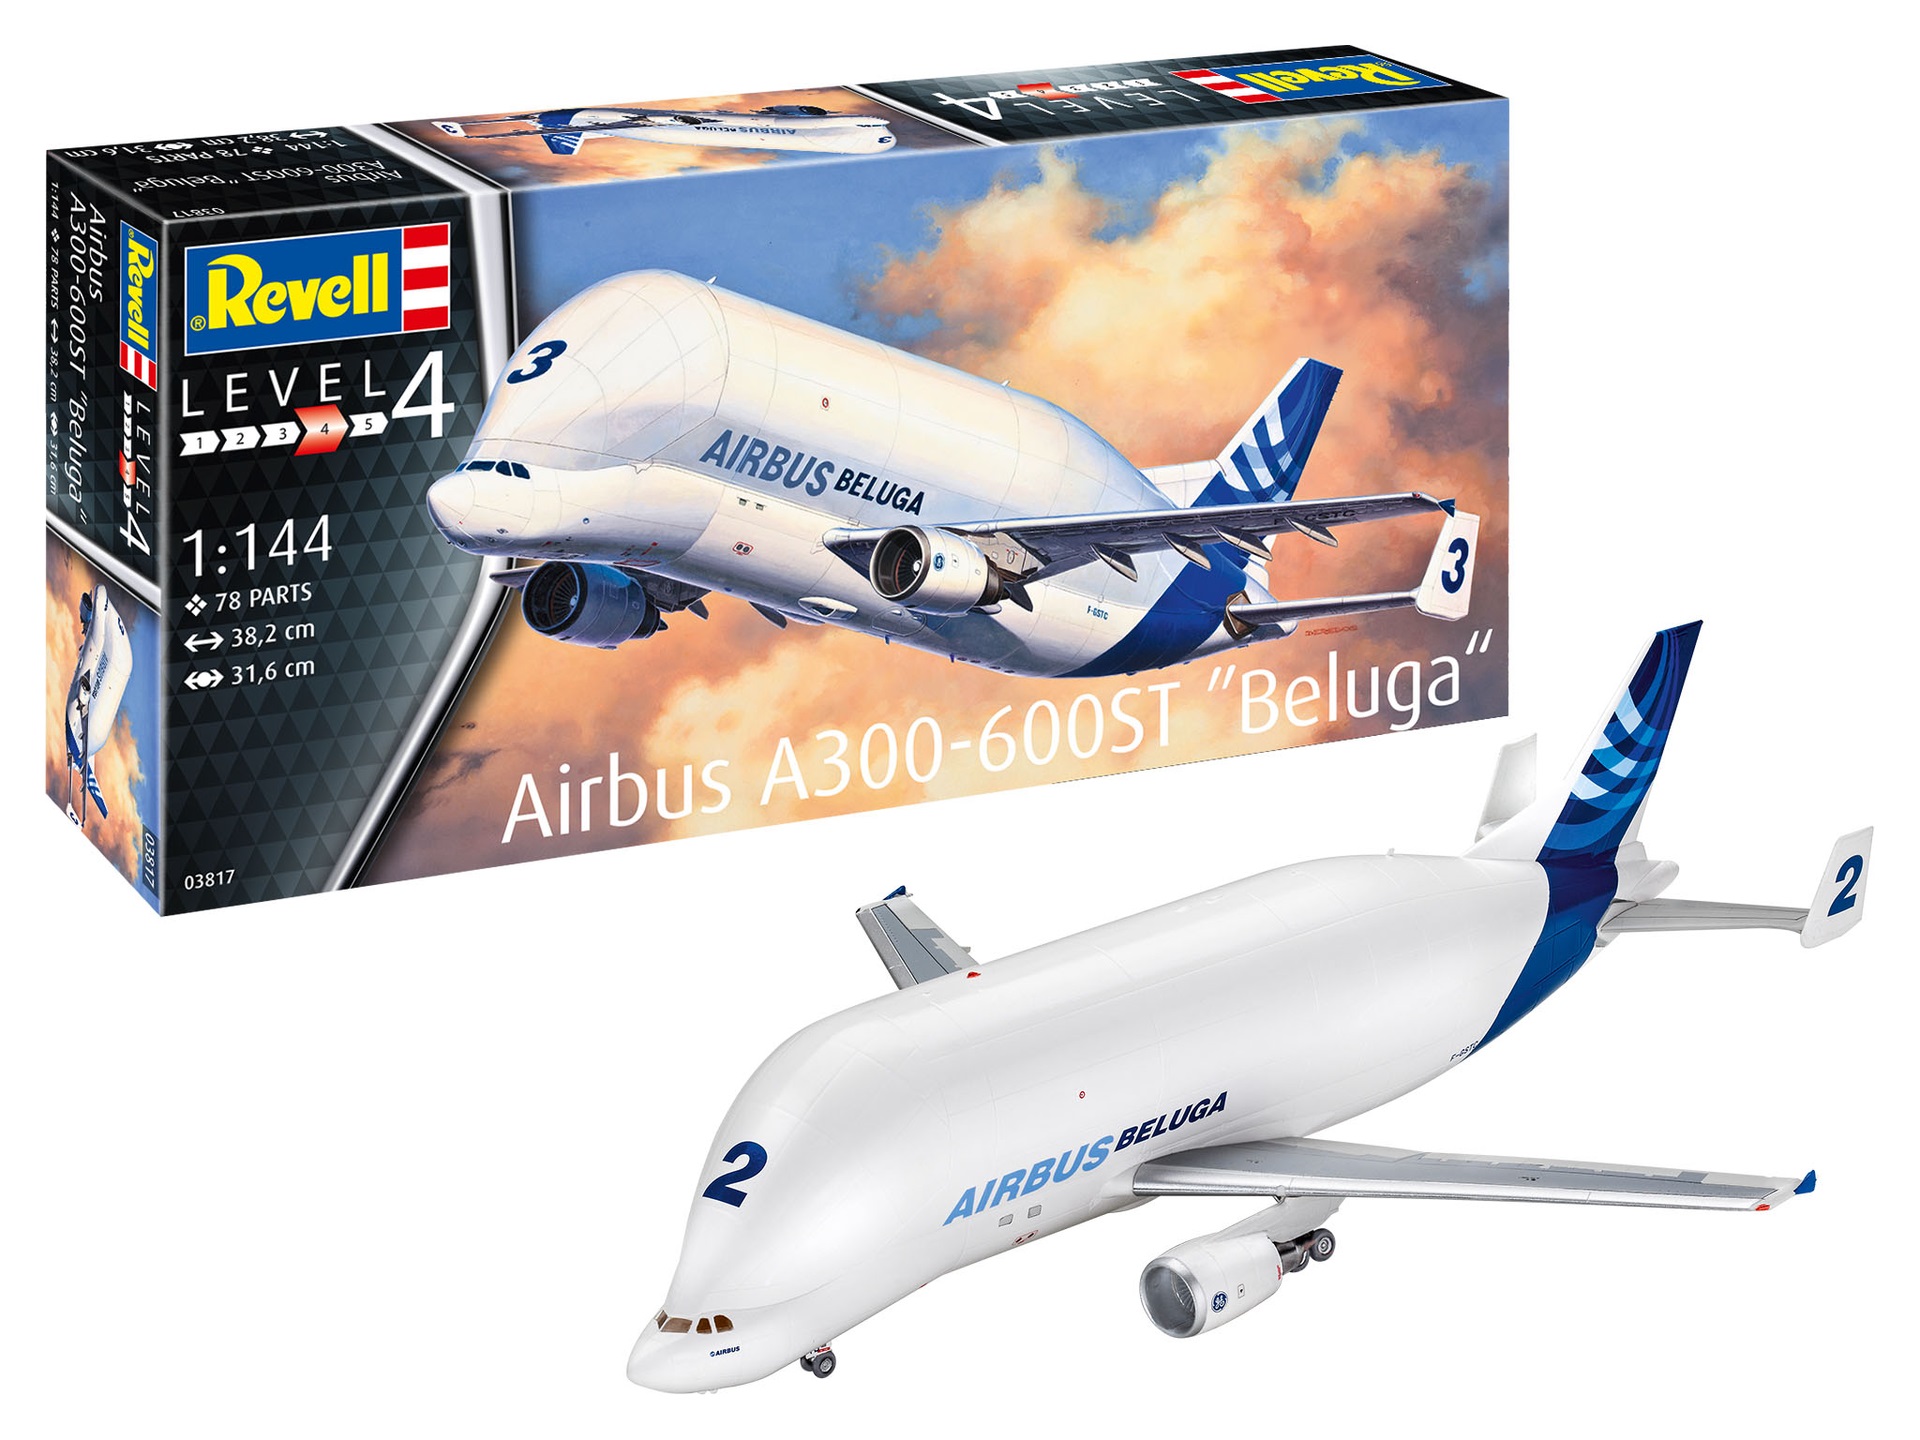 Revell Airbus A300-600ST Beluga 1:144 Scale